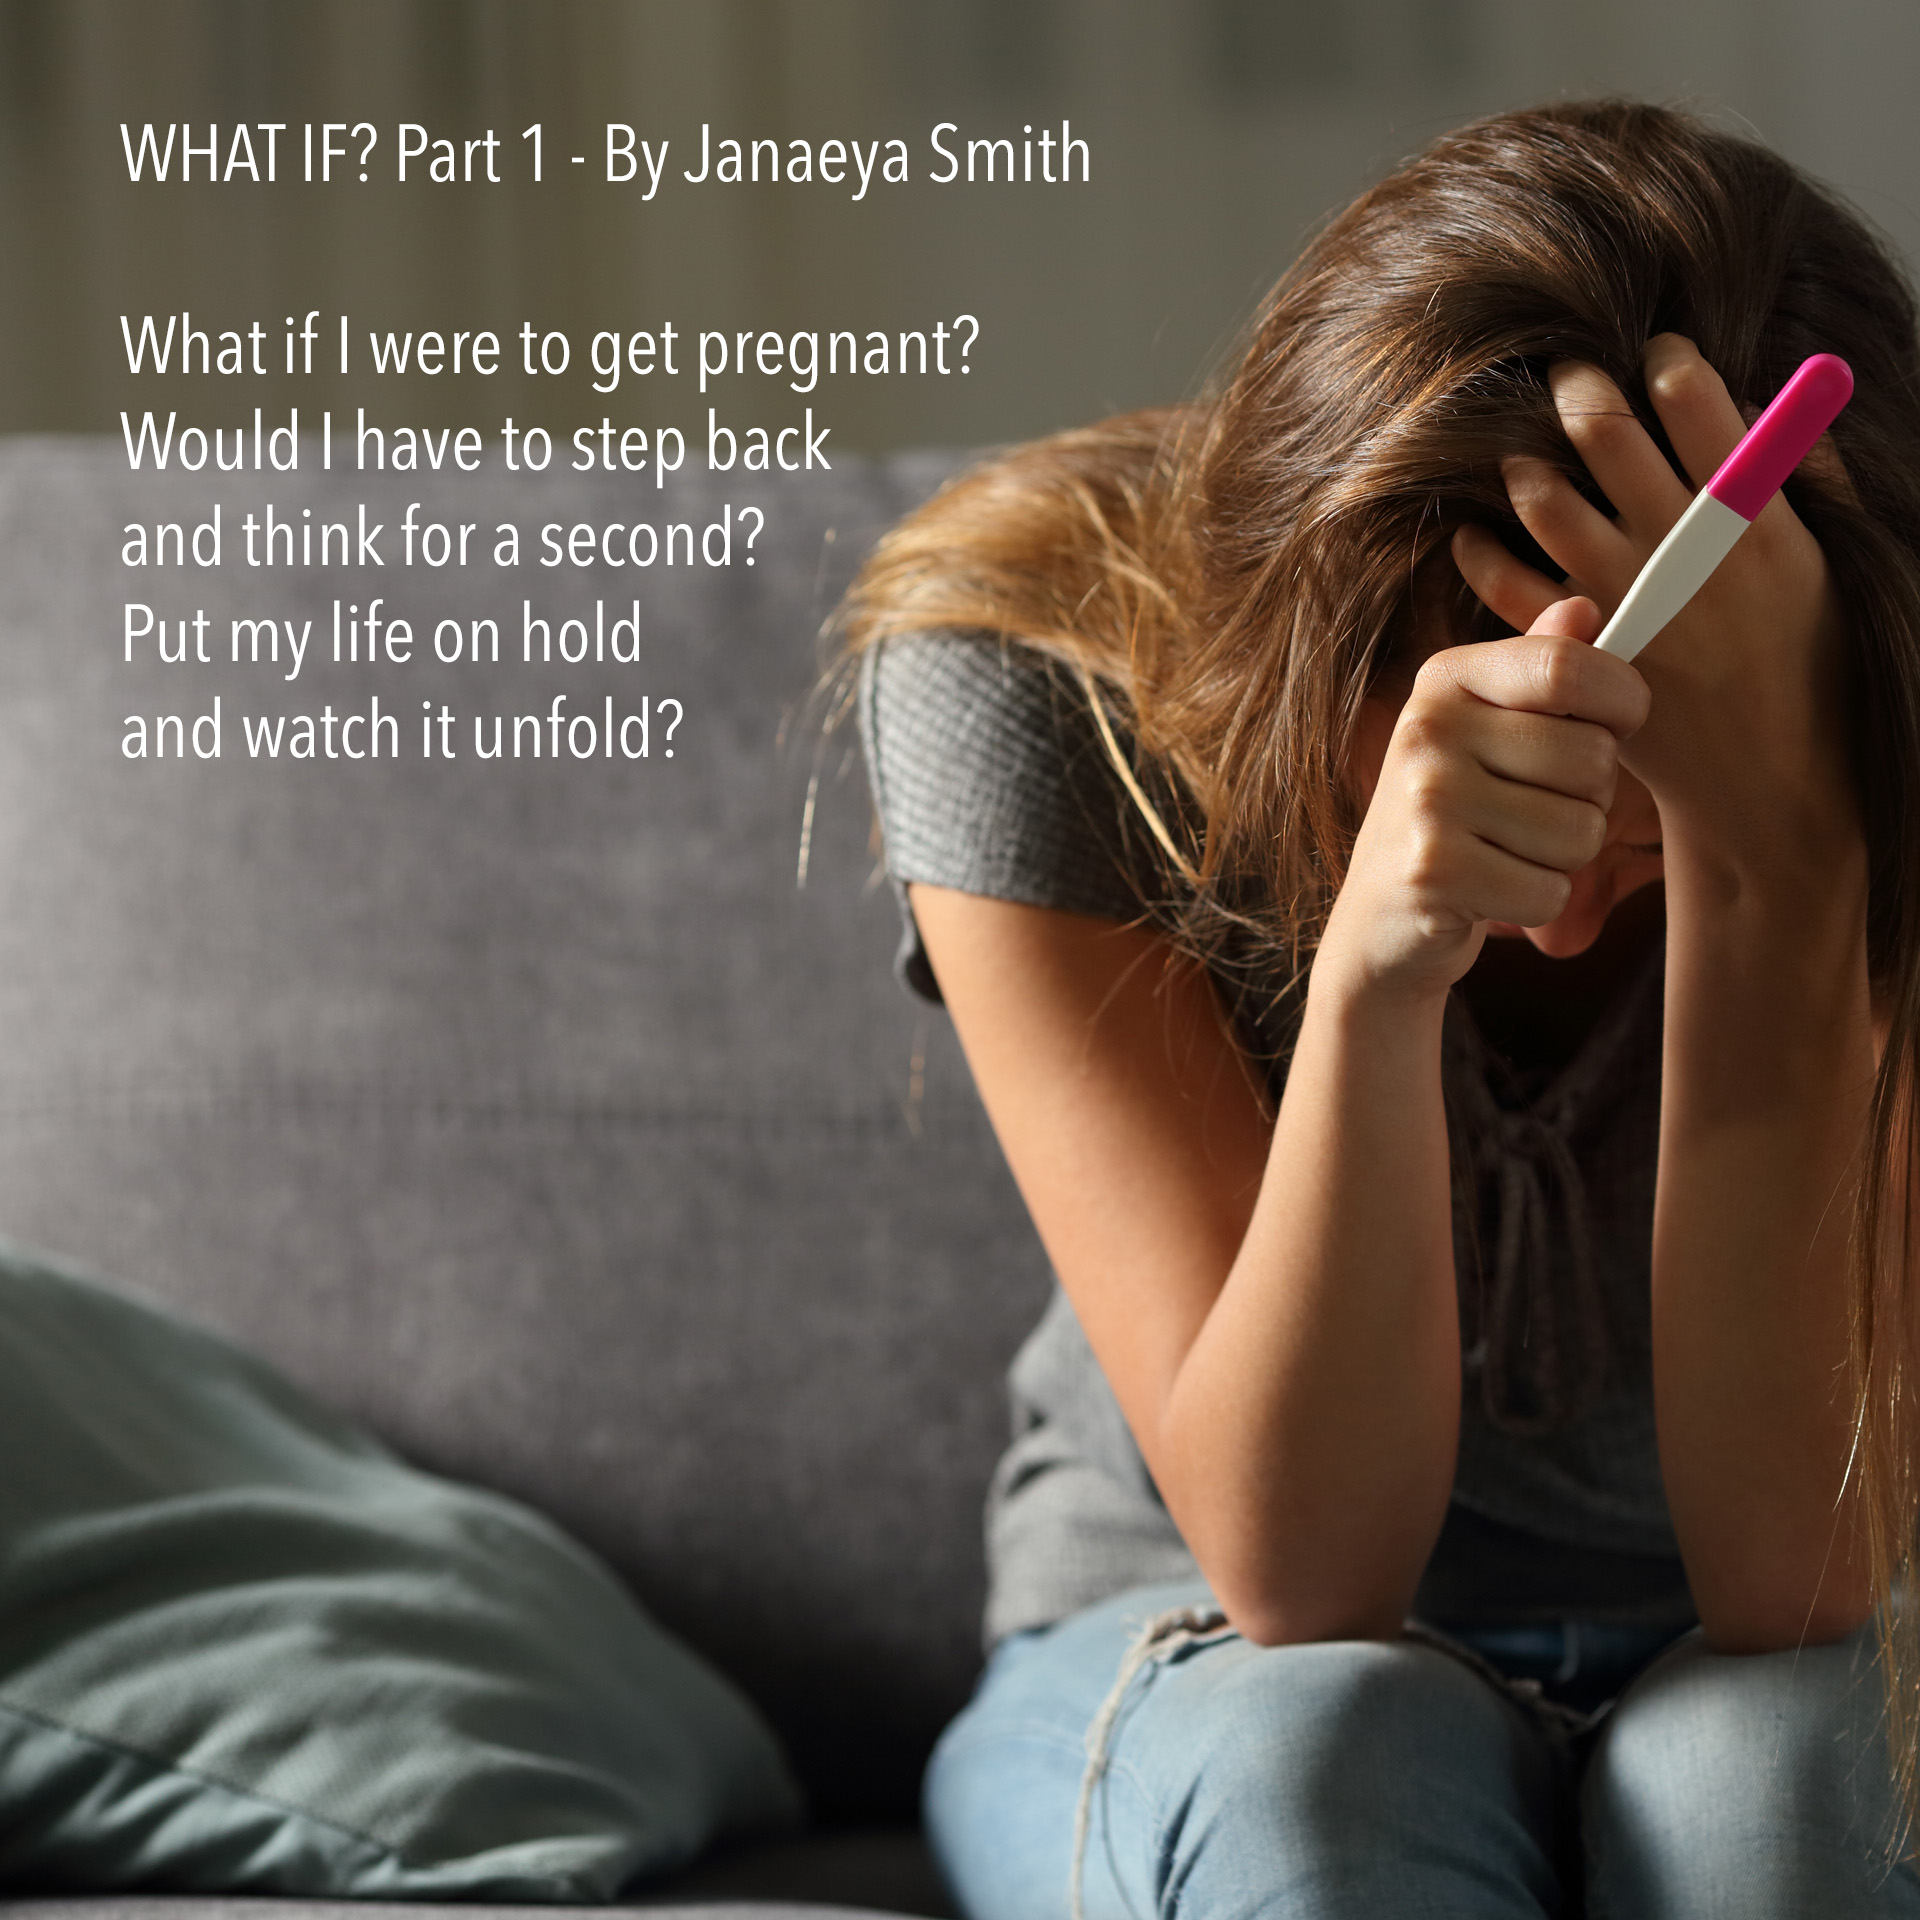 WHAT IF? Part 1 - By Janaeya Smith